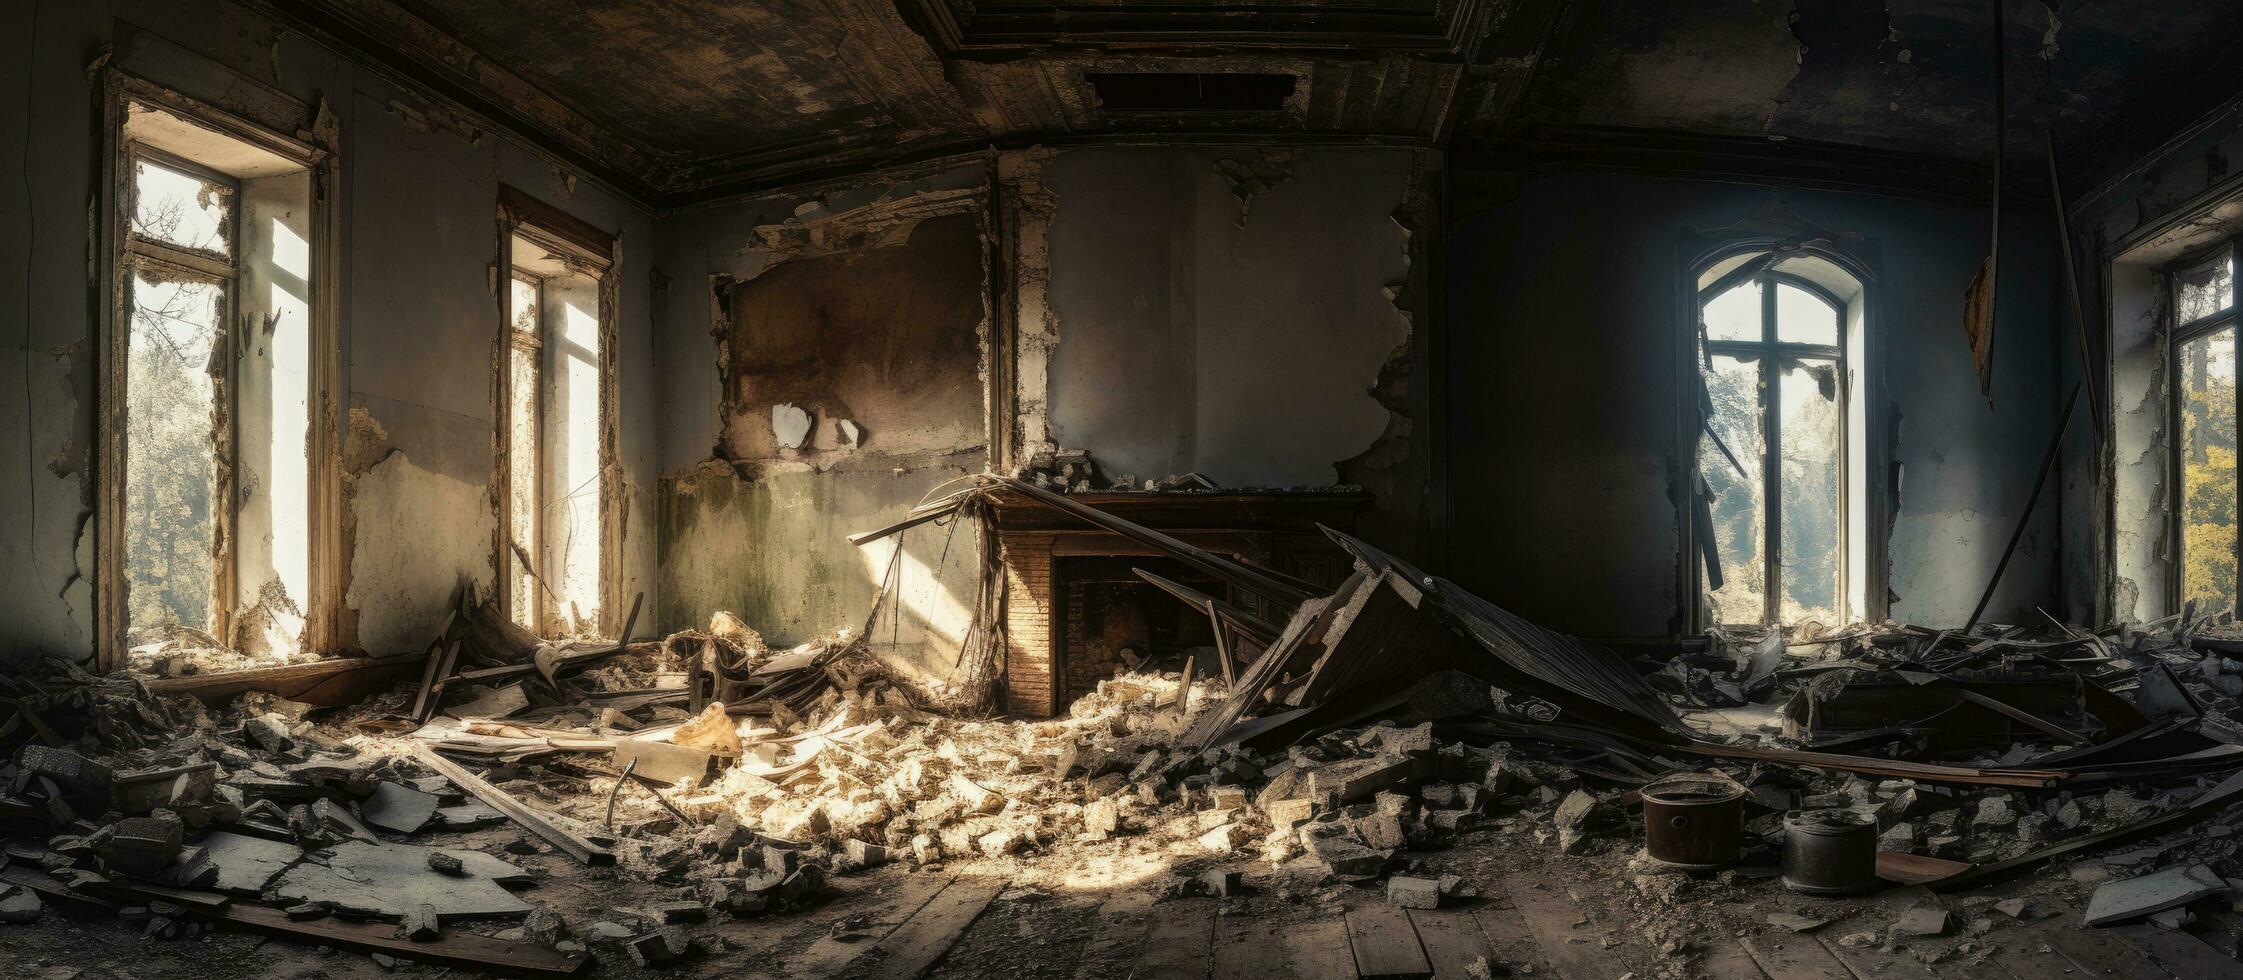 Interior of abandoned old house destroyed photo